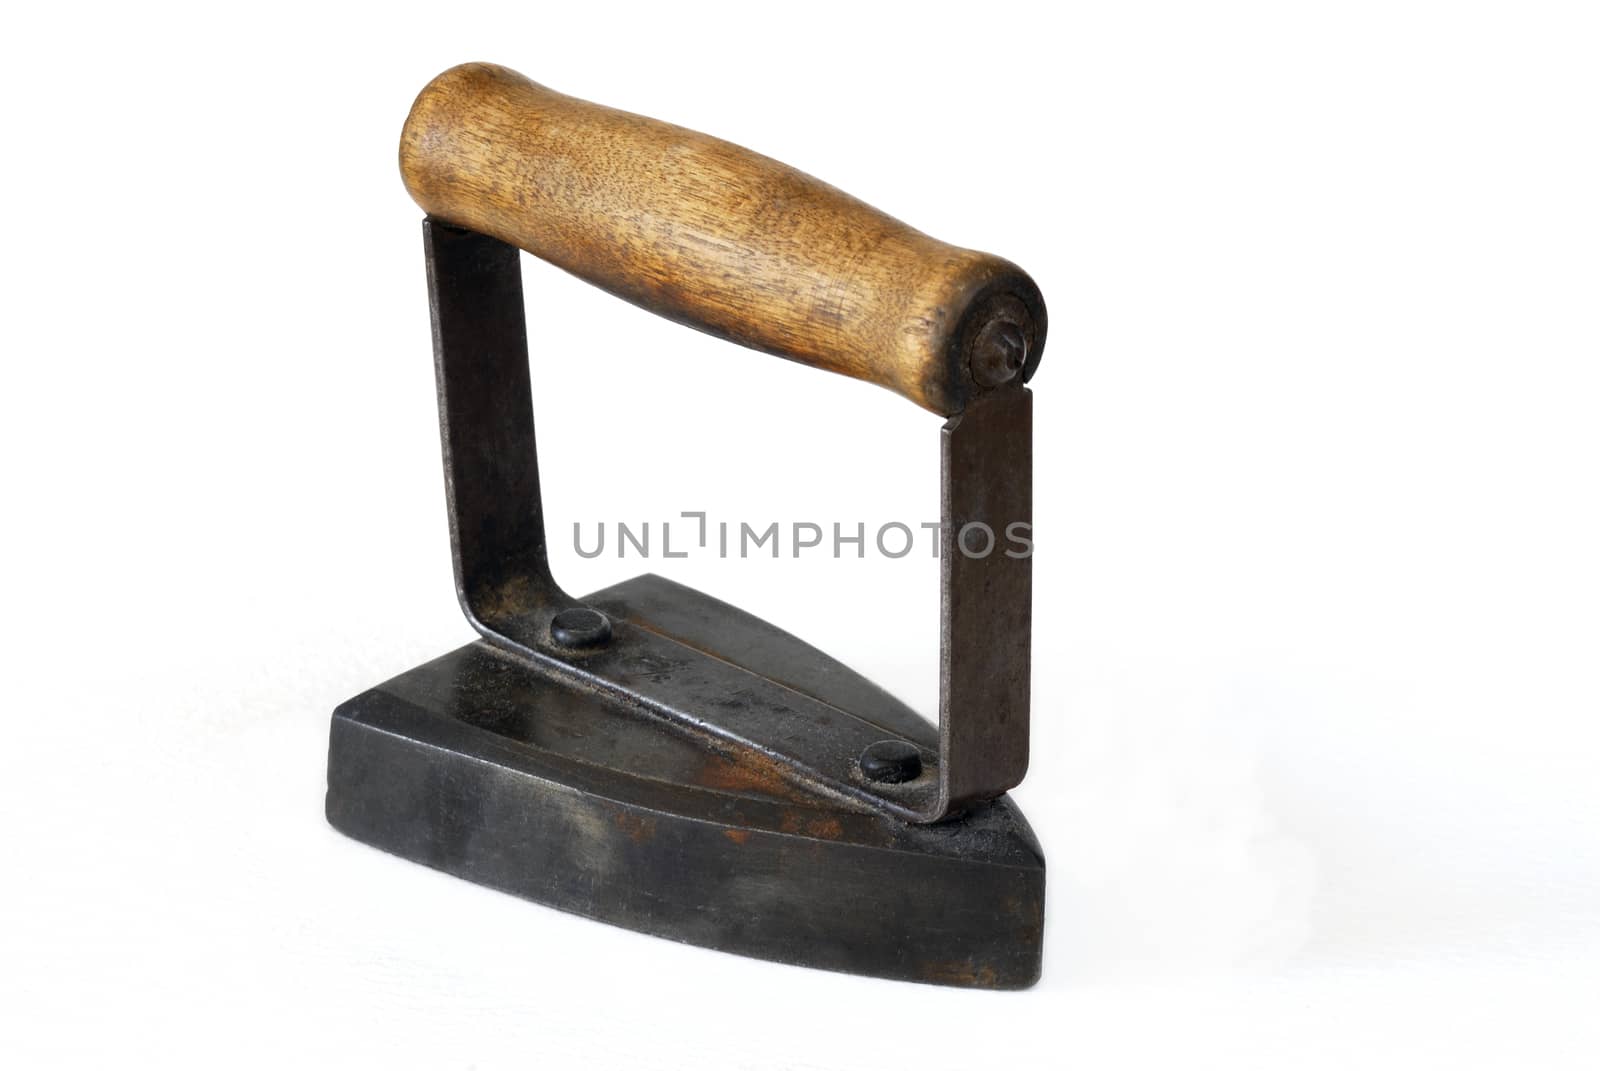 Old iron over white background